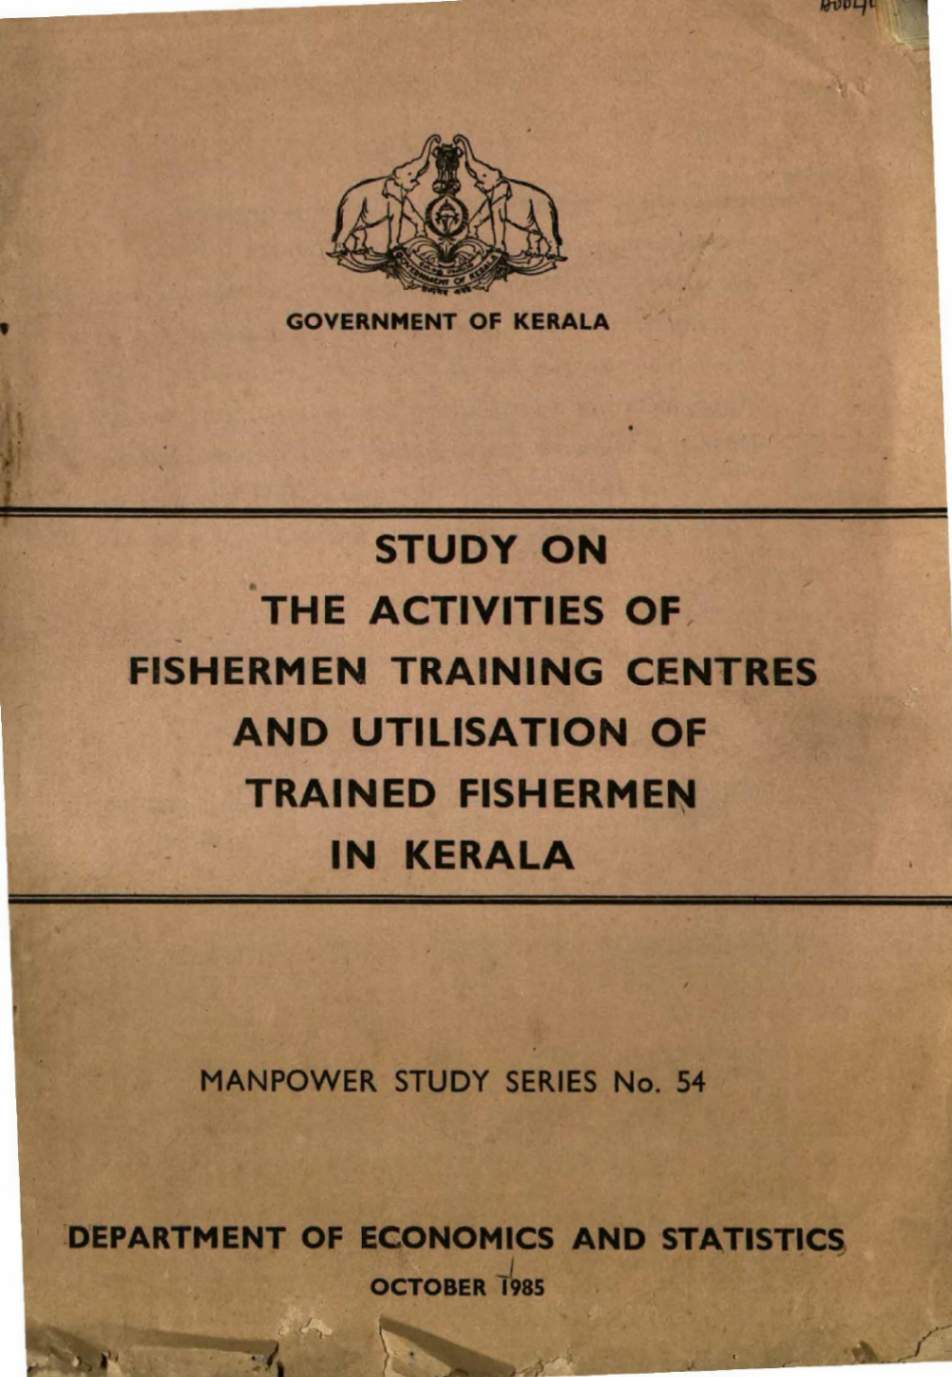 STUDY ON THE ACTIVITIES OF FISHERMAN TRAINING CENTRES AND UTILISATION OF TRAINED FISHERMAN IN KERALA